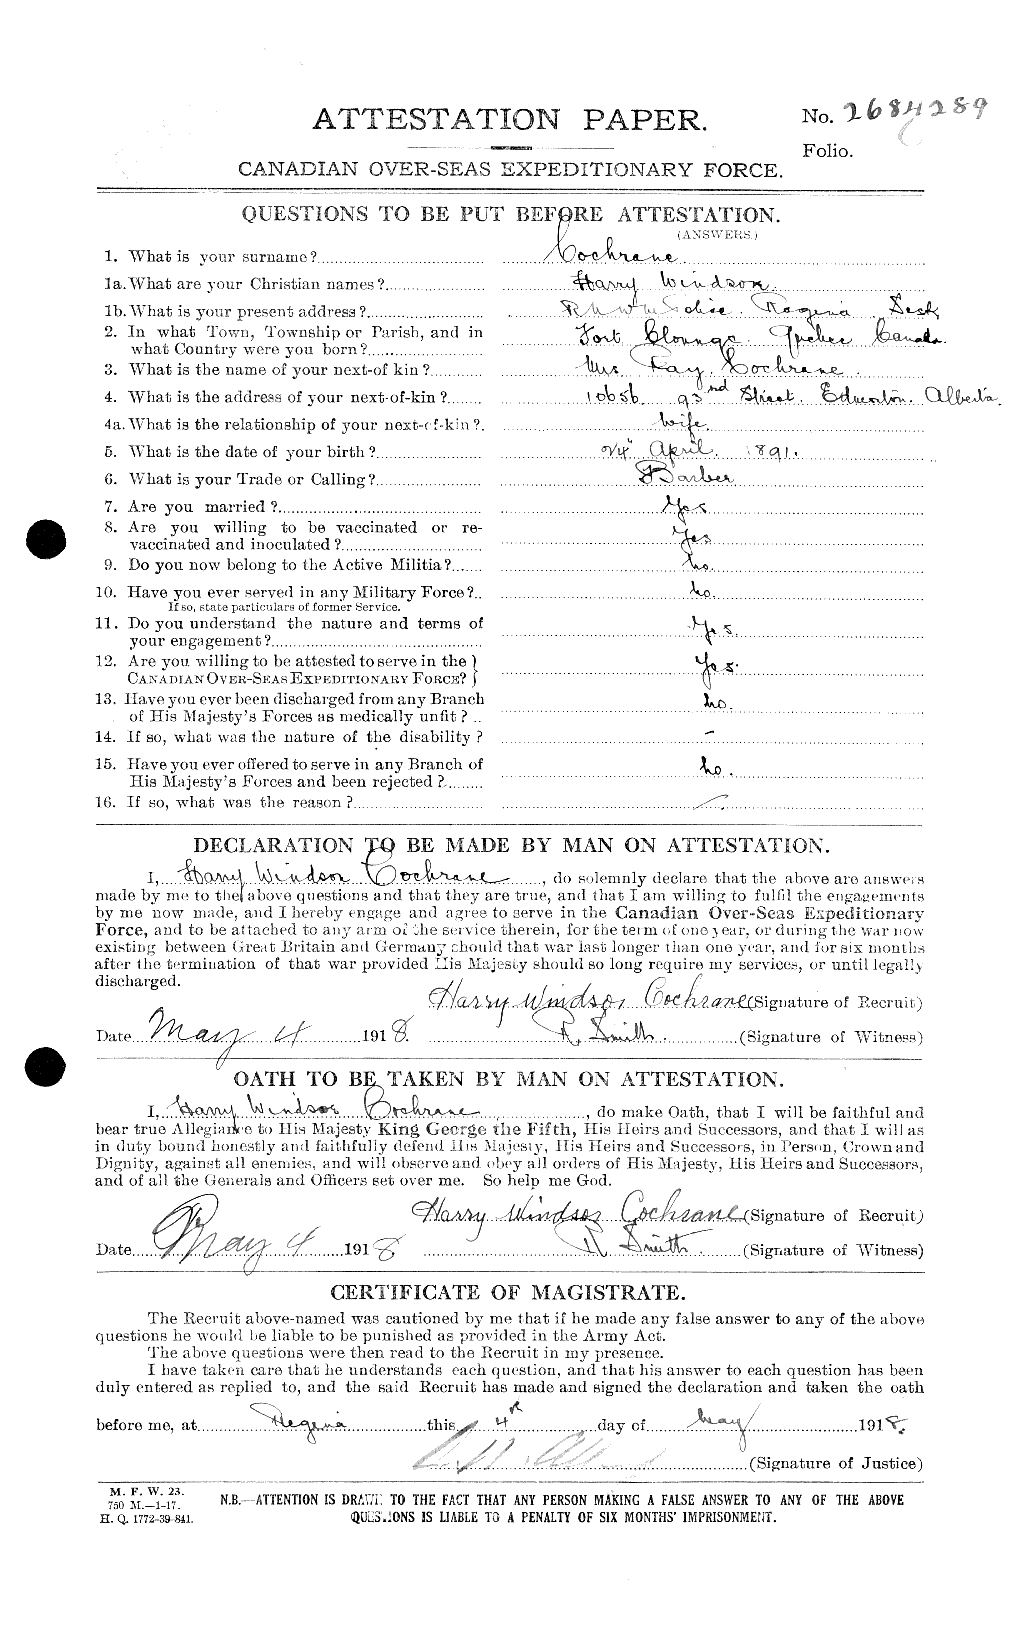 Personnel Records of the First World War - CEF 026366a